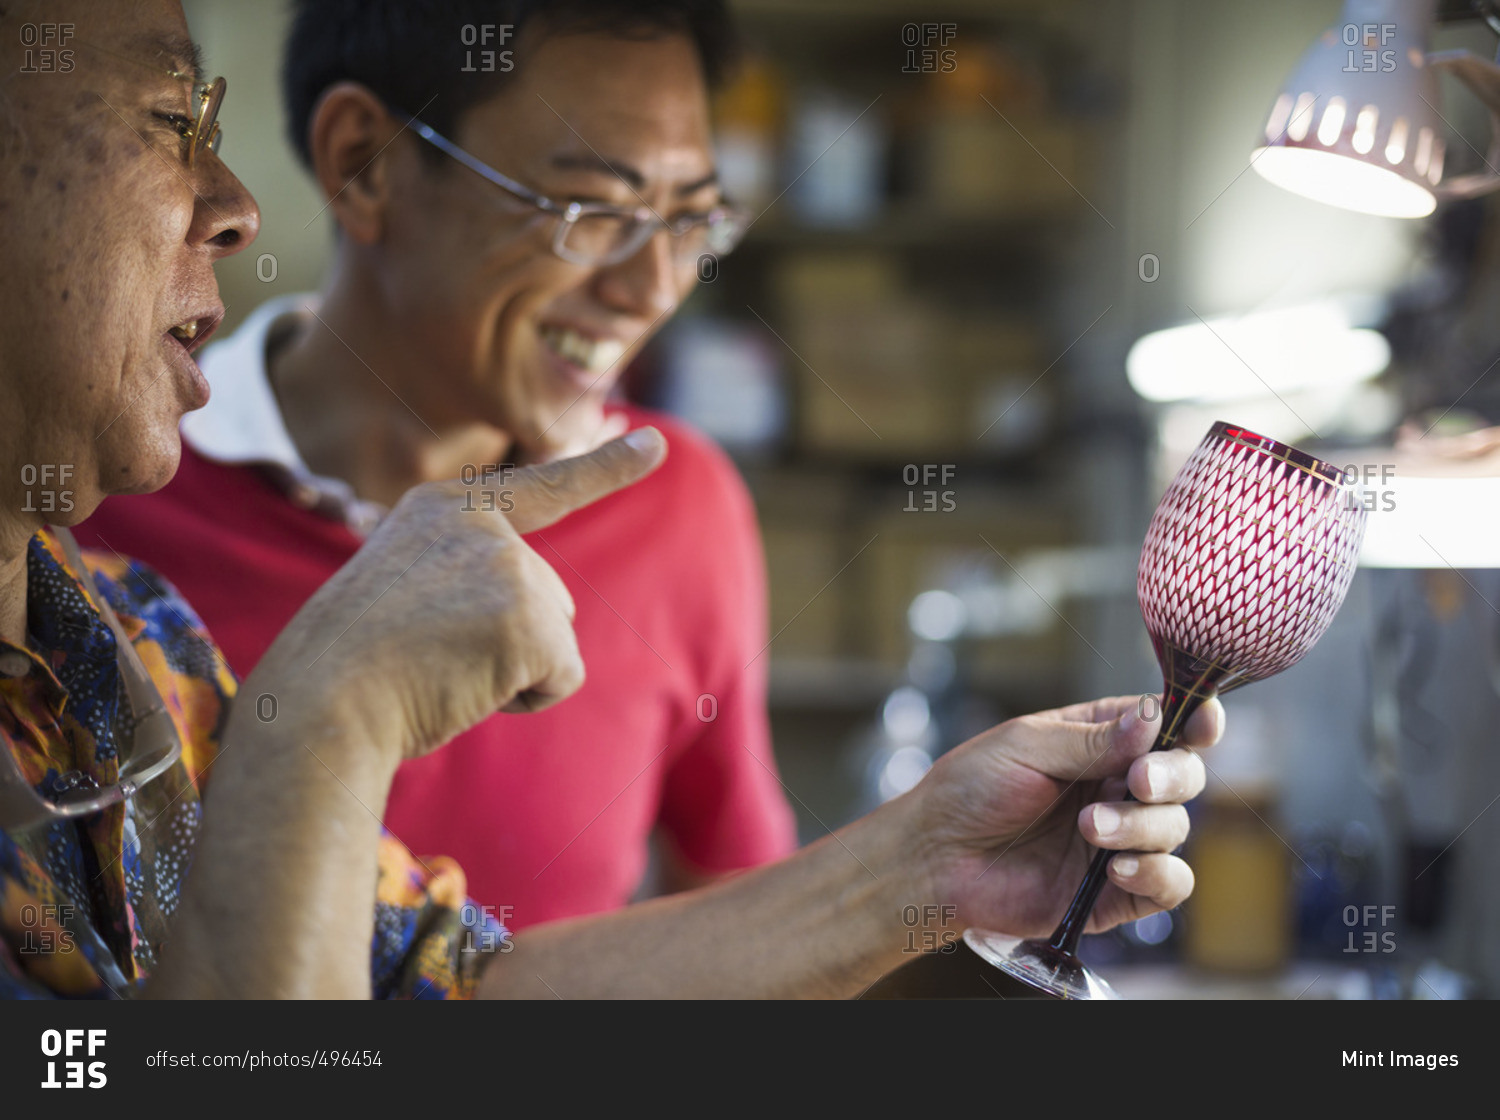 Father and son at work at a glass maker's studio workshop, inspecting a red cut glass wine glass.